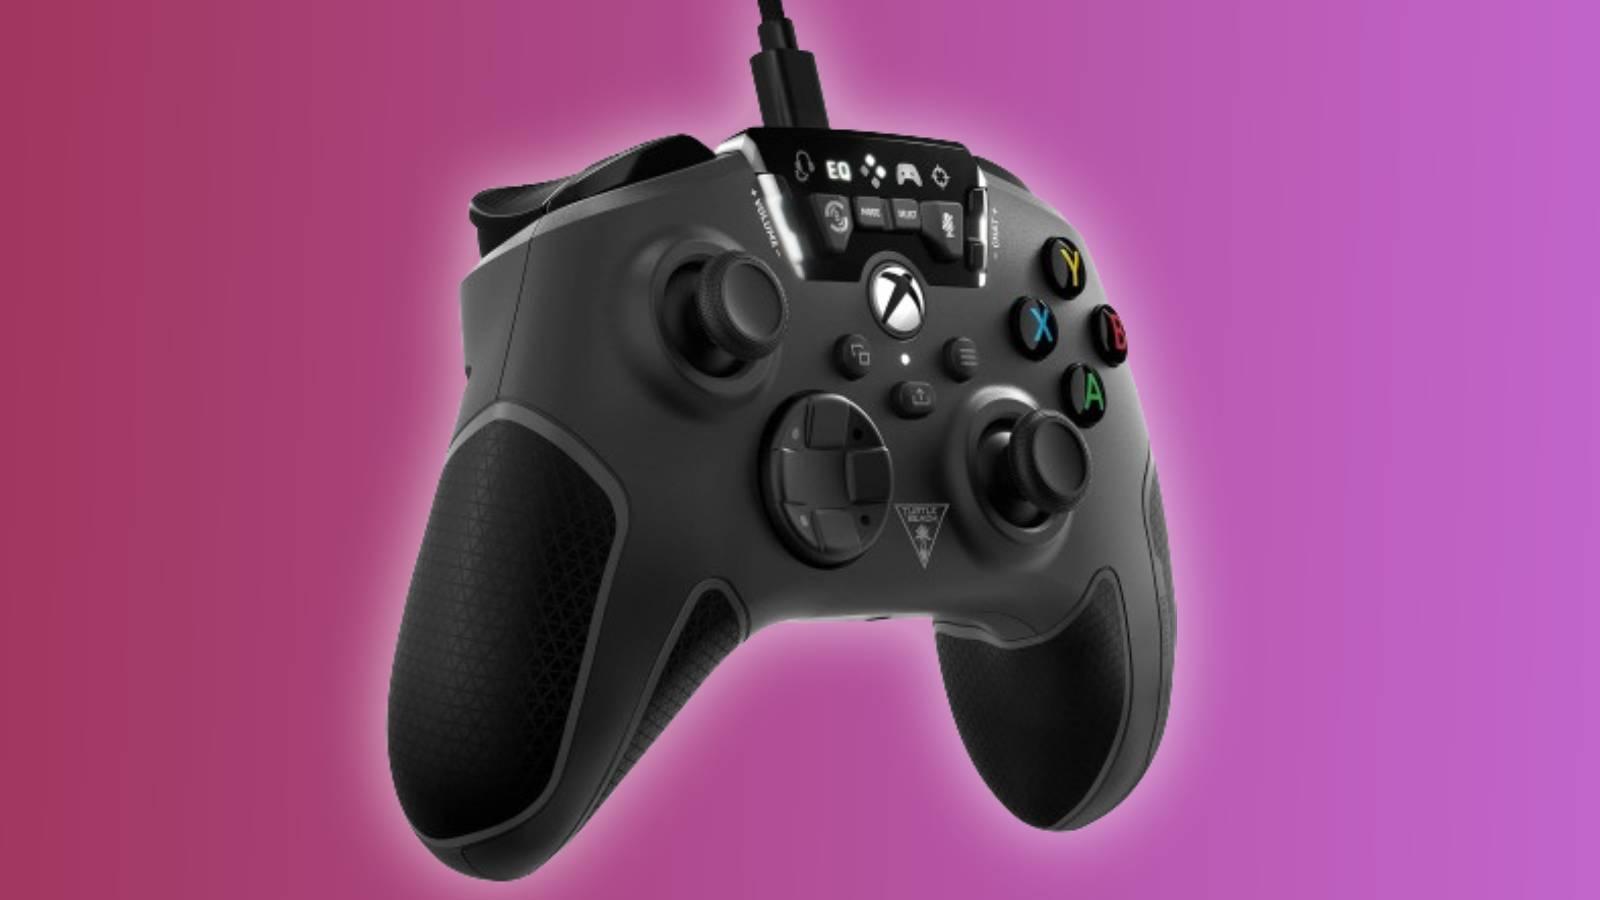 Image of the Turtle Beach Recon controller on a pink and red background.